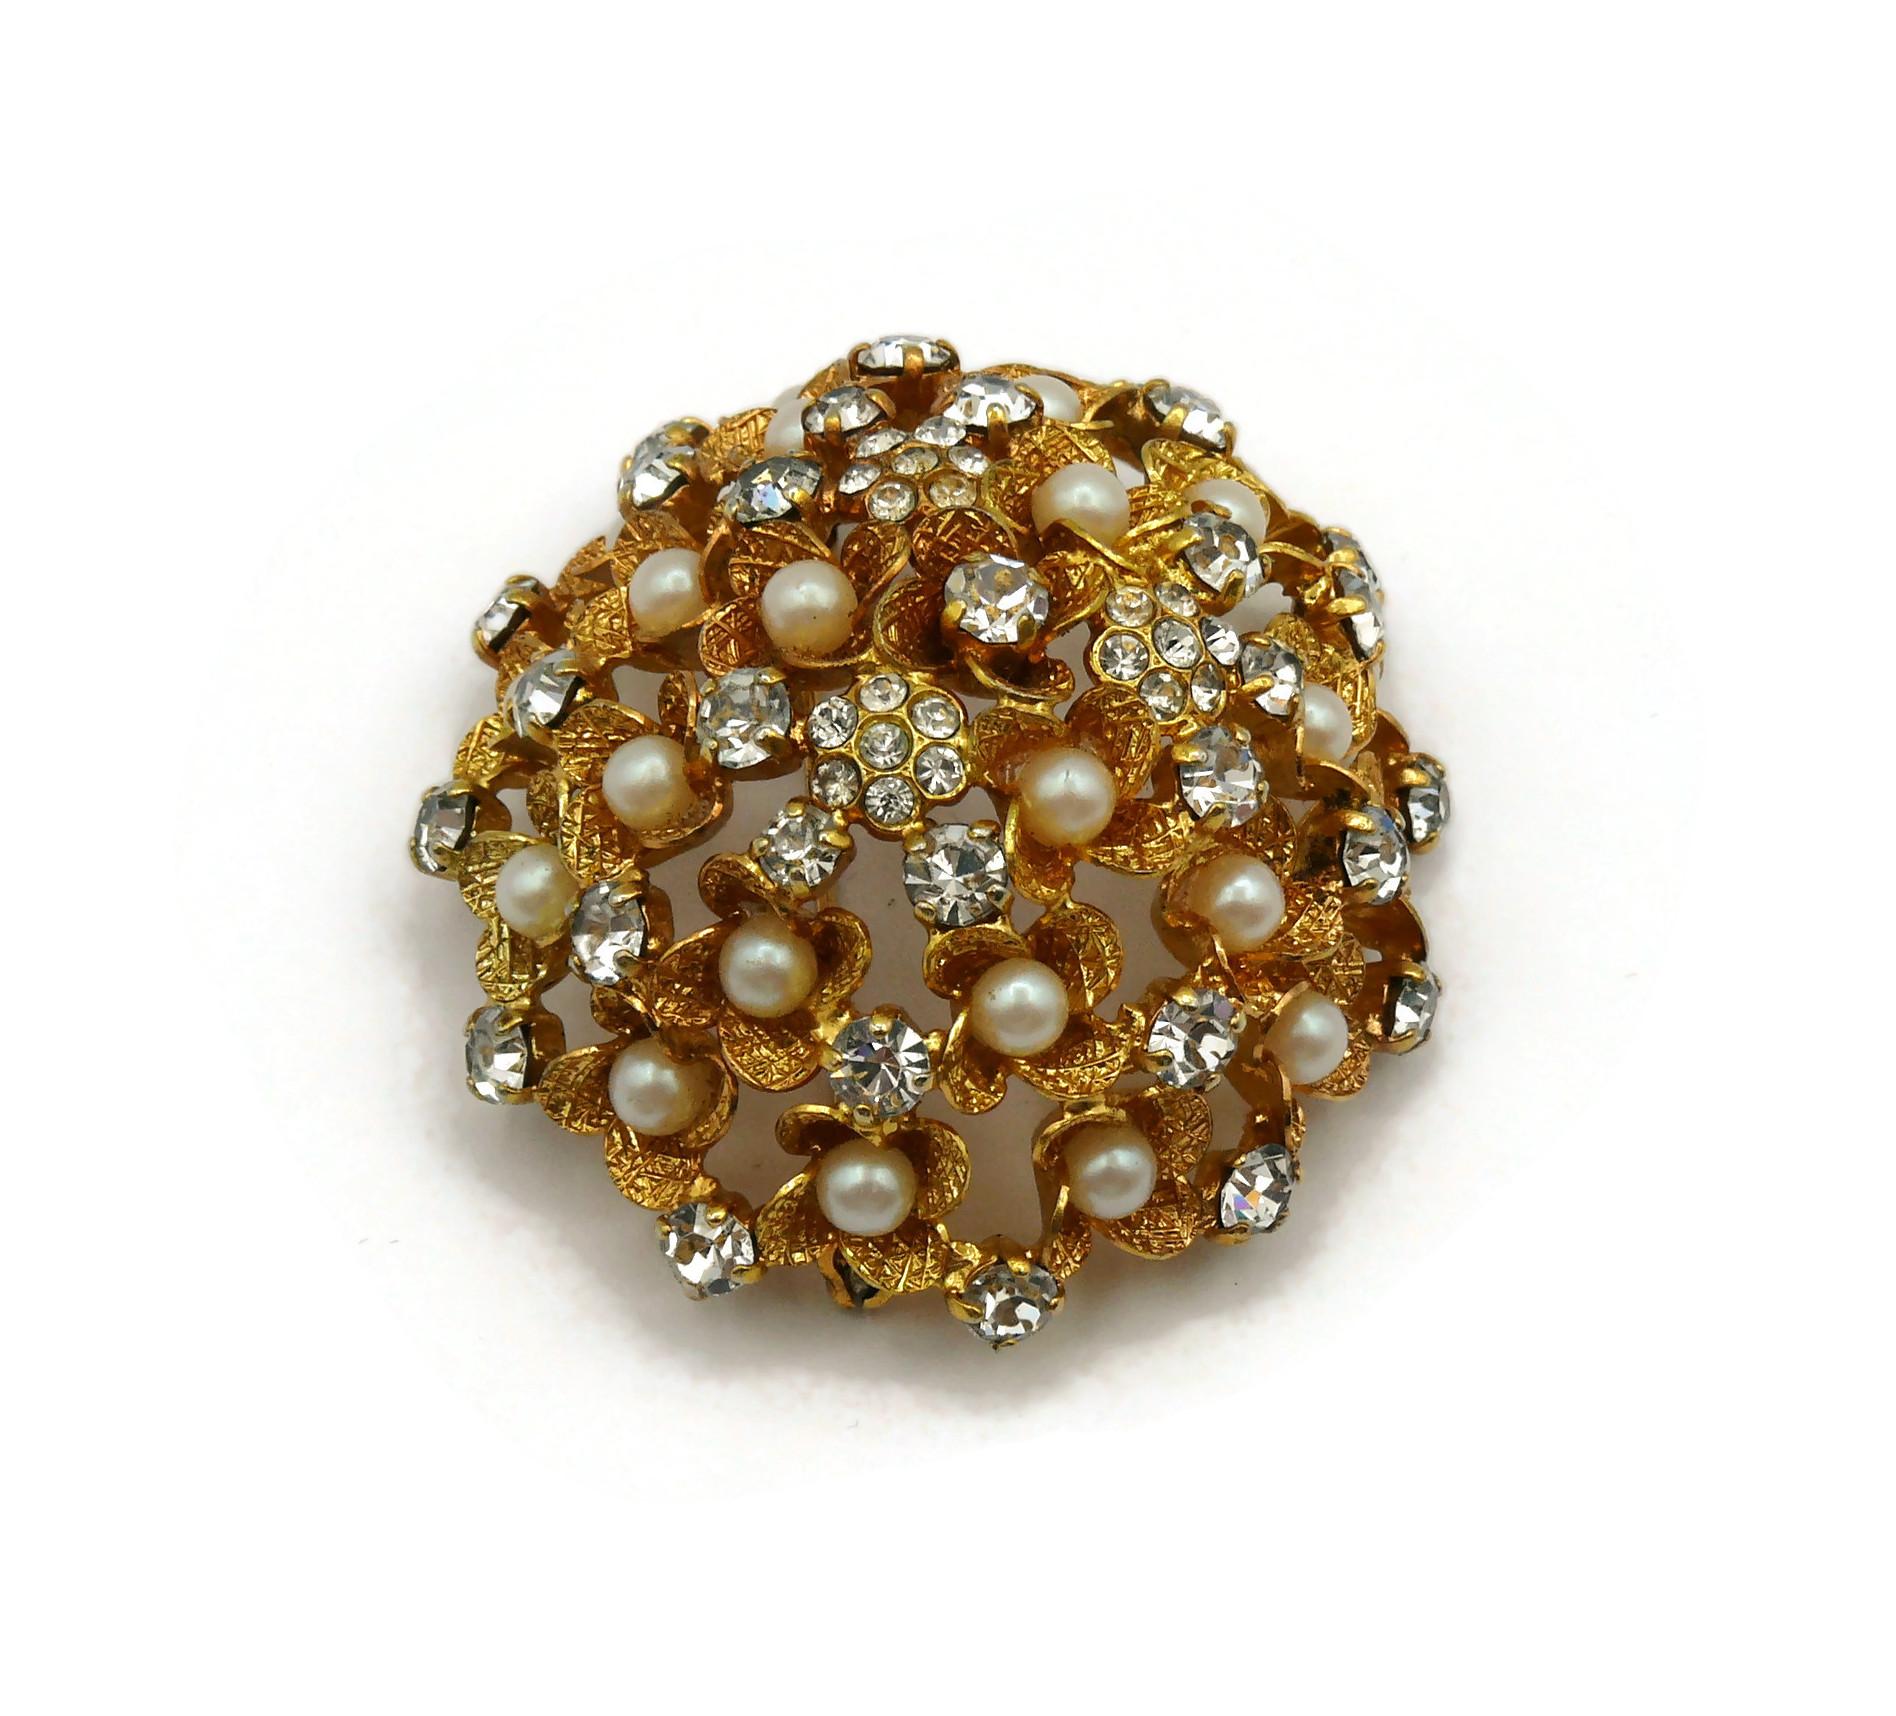 CHRISTIAN DIOR Vintage Jewelled Gold Tone Domed Brooch, 1966 For Sale 4